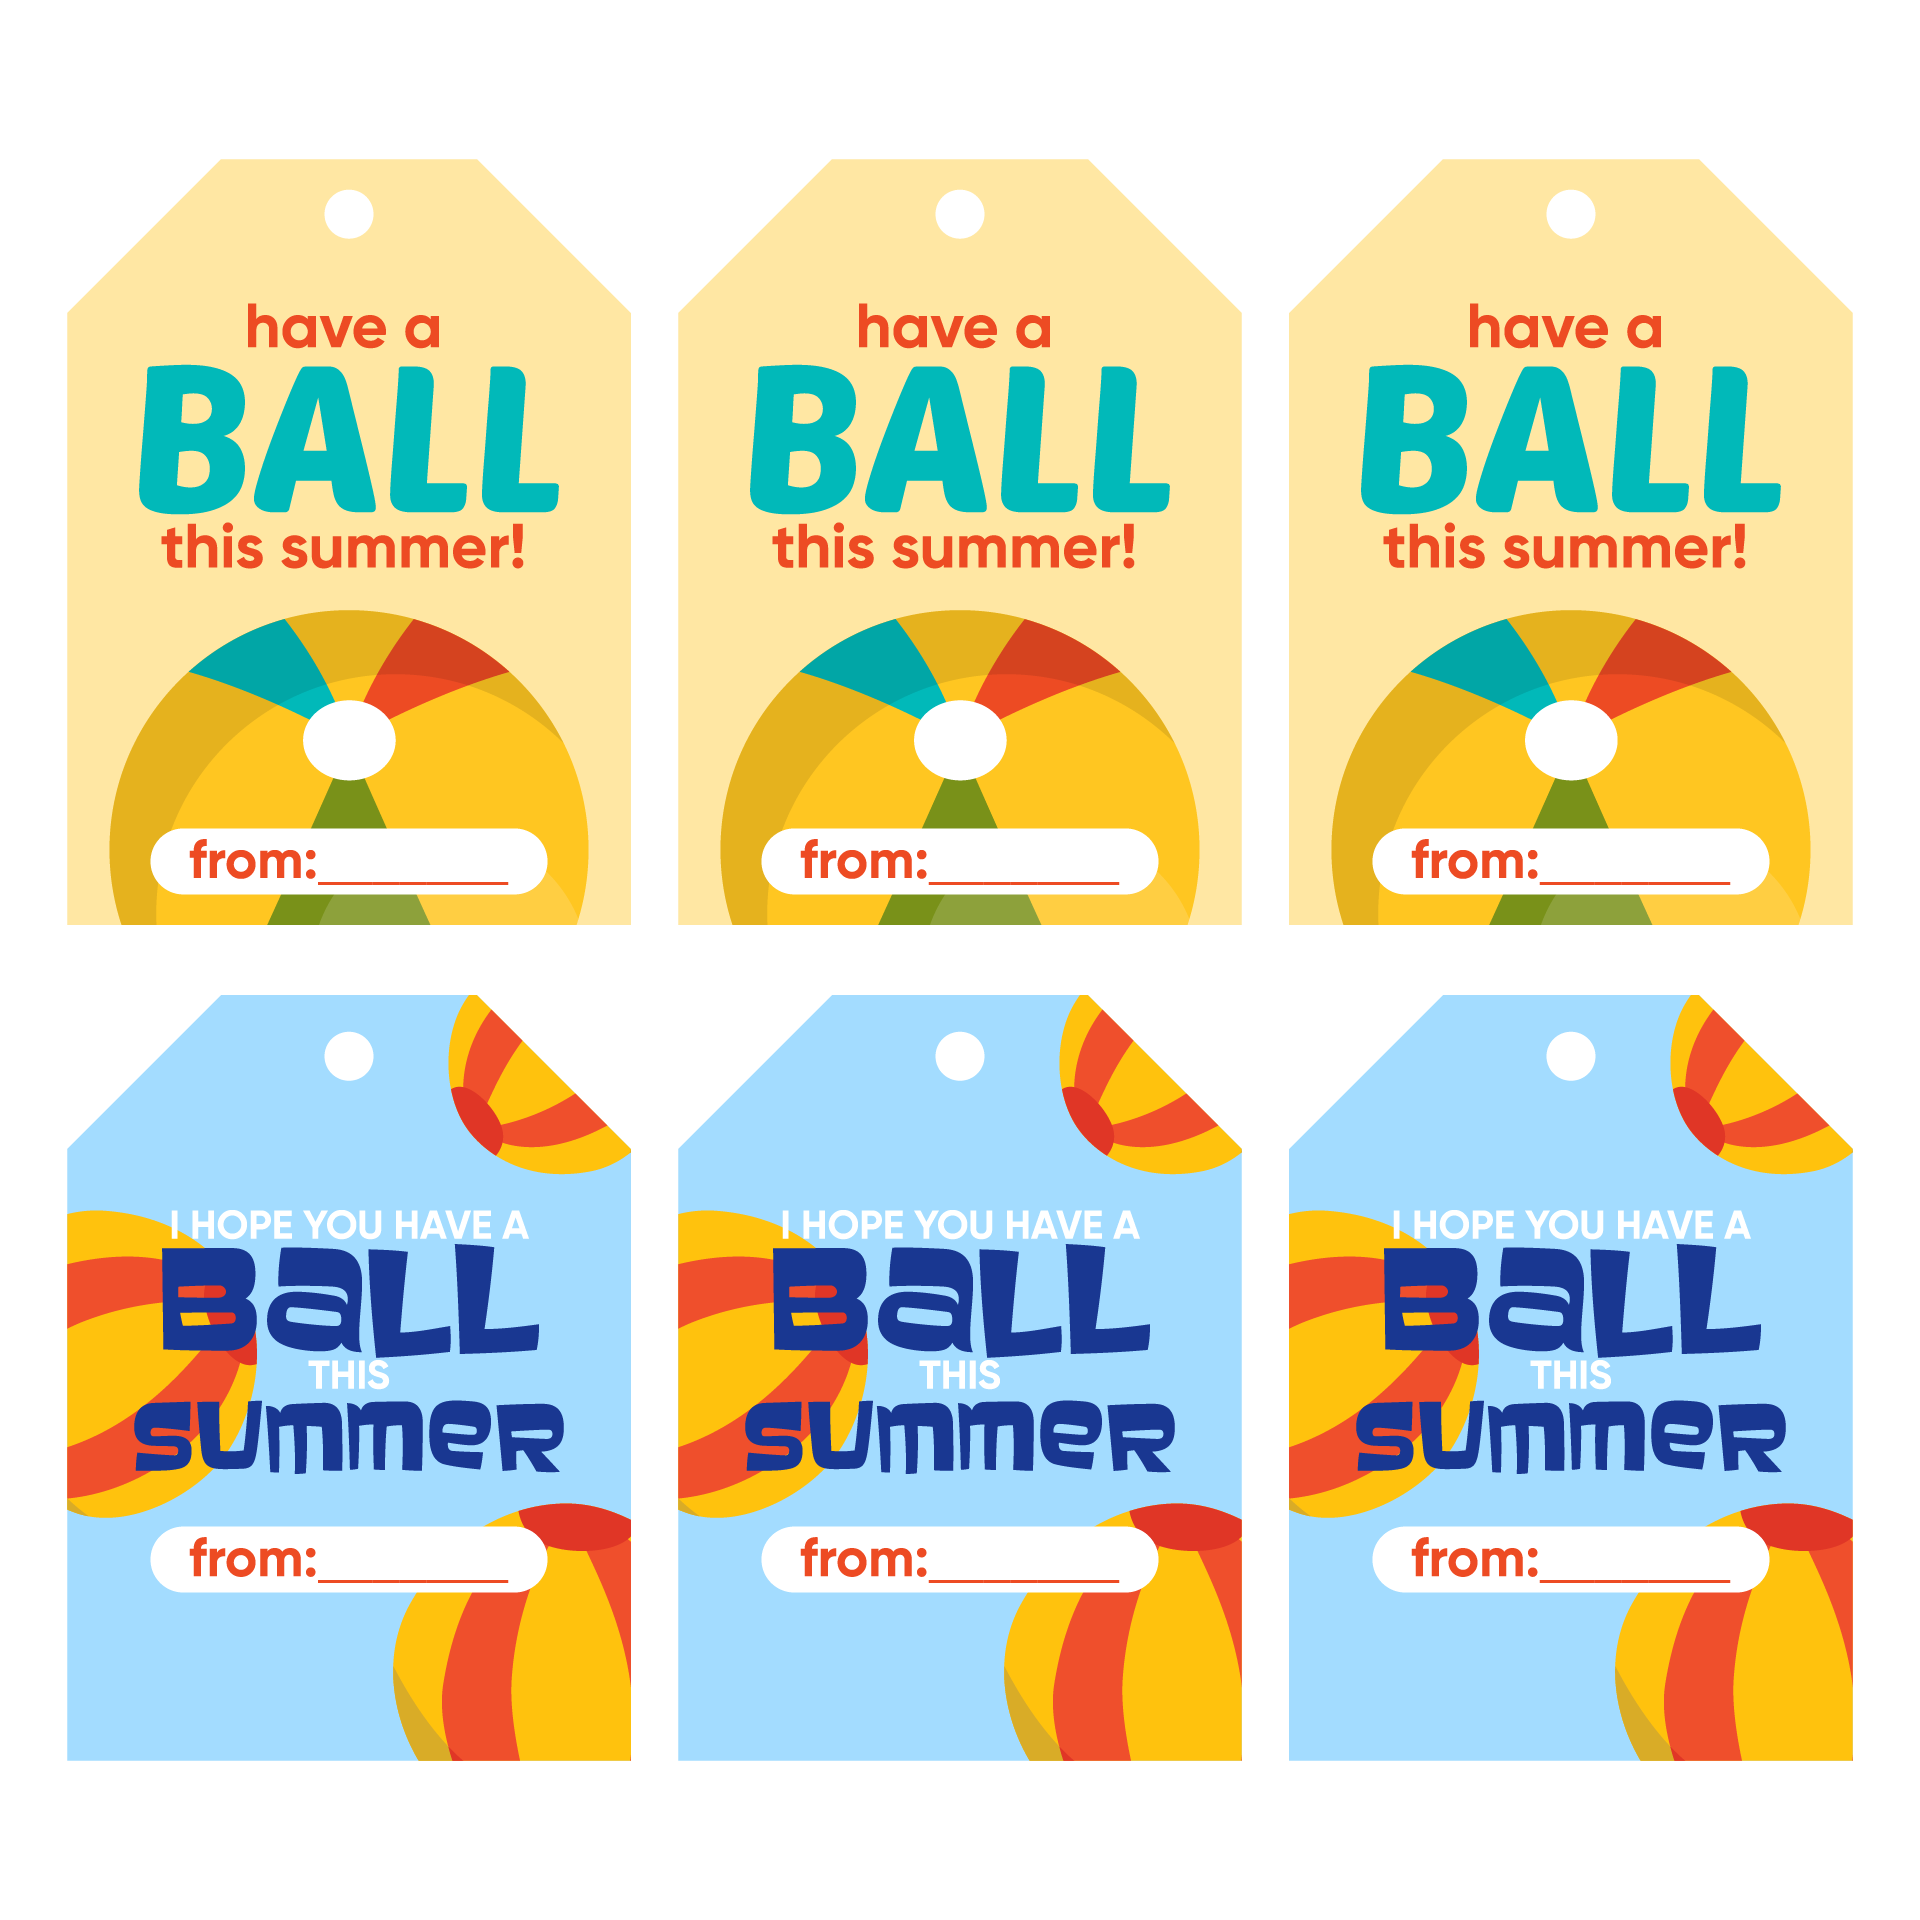 Beach Favors Cards Classmates Exchange Have A Ball This Summer